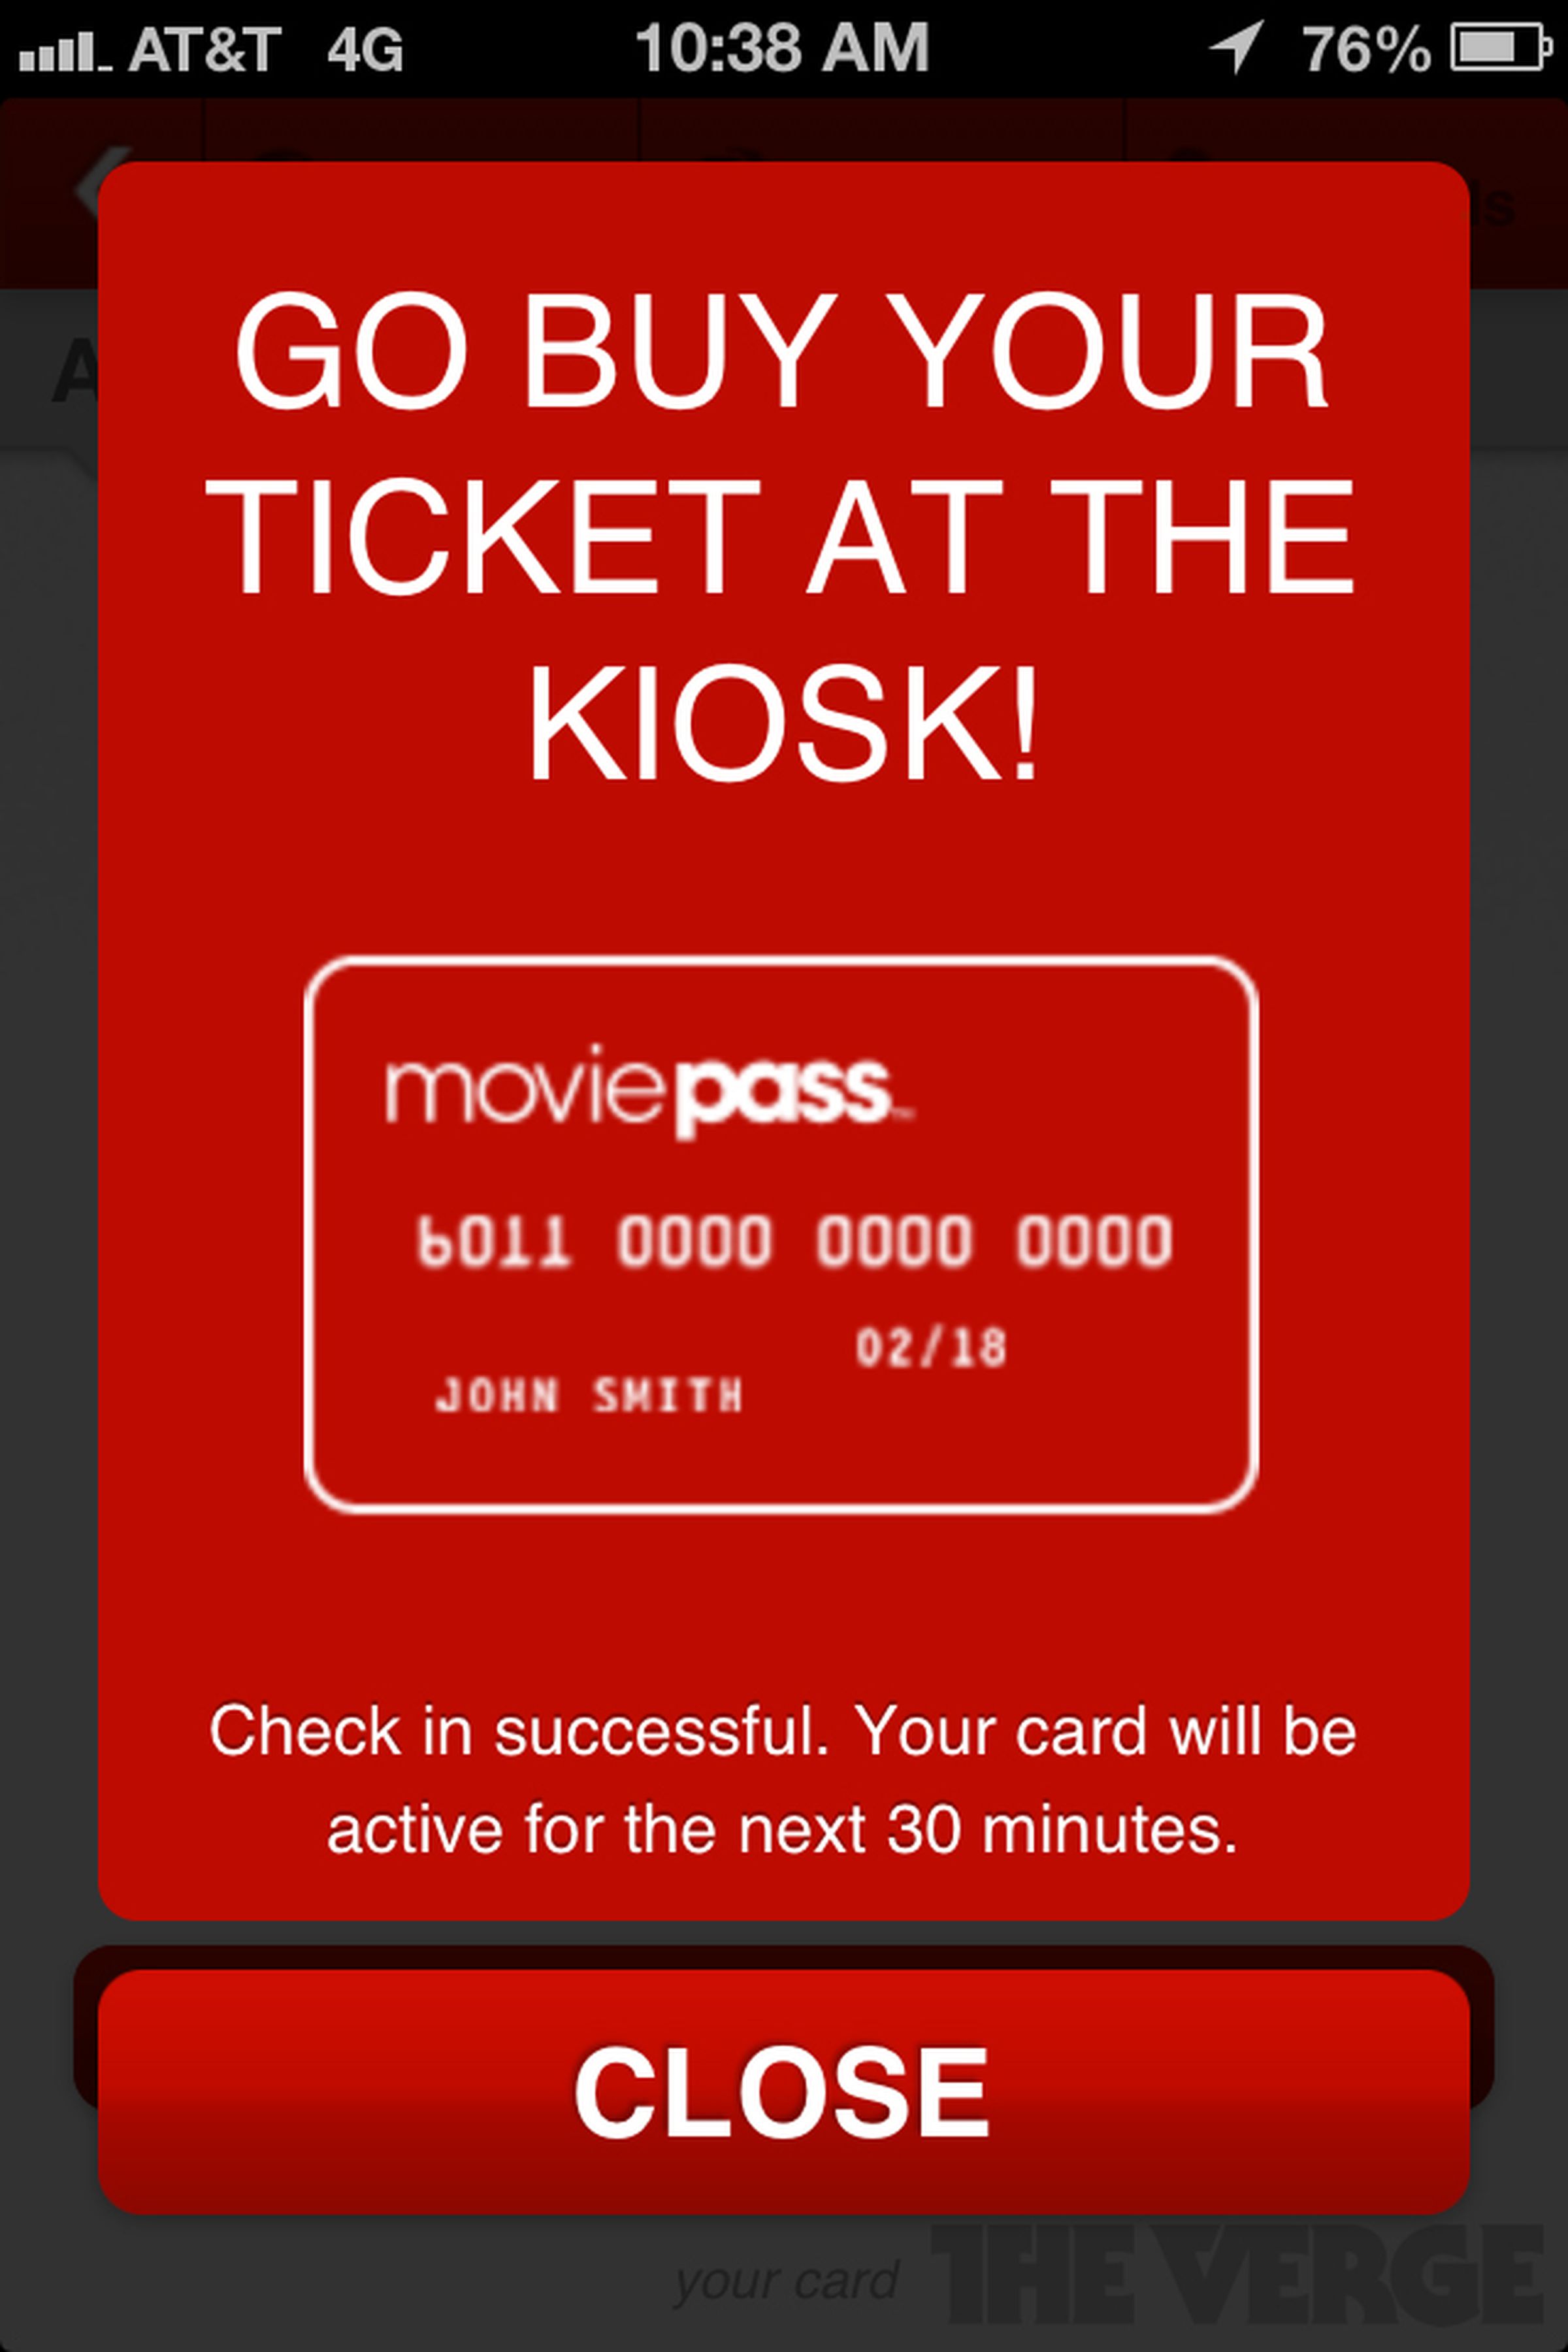 MoviePass hands-on images